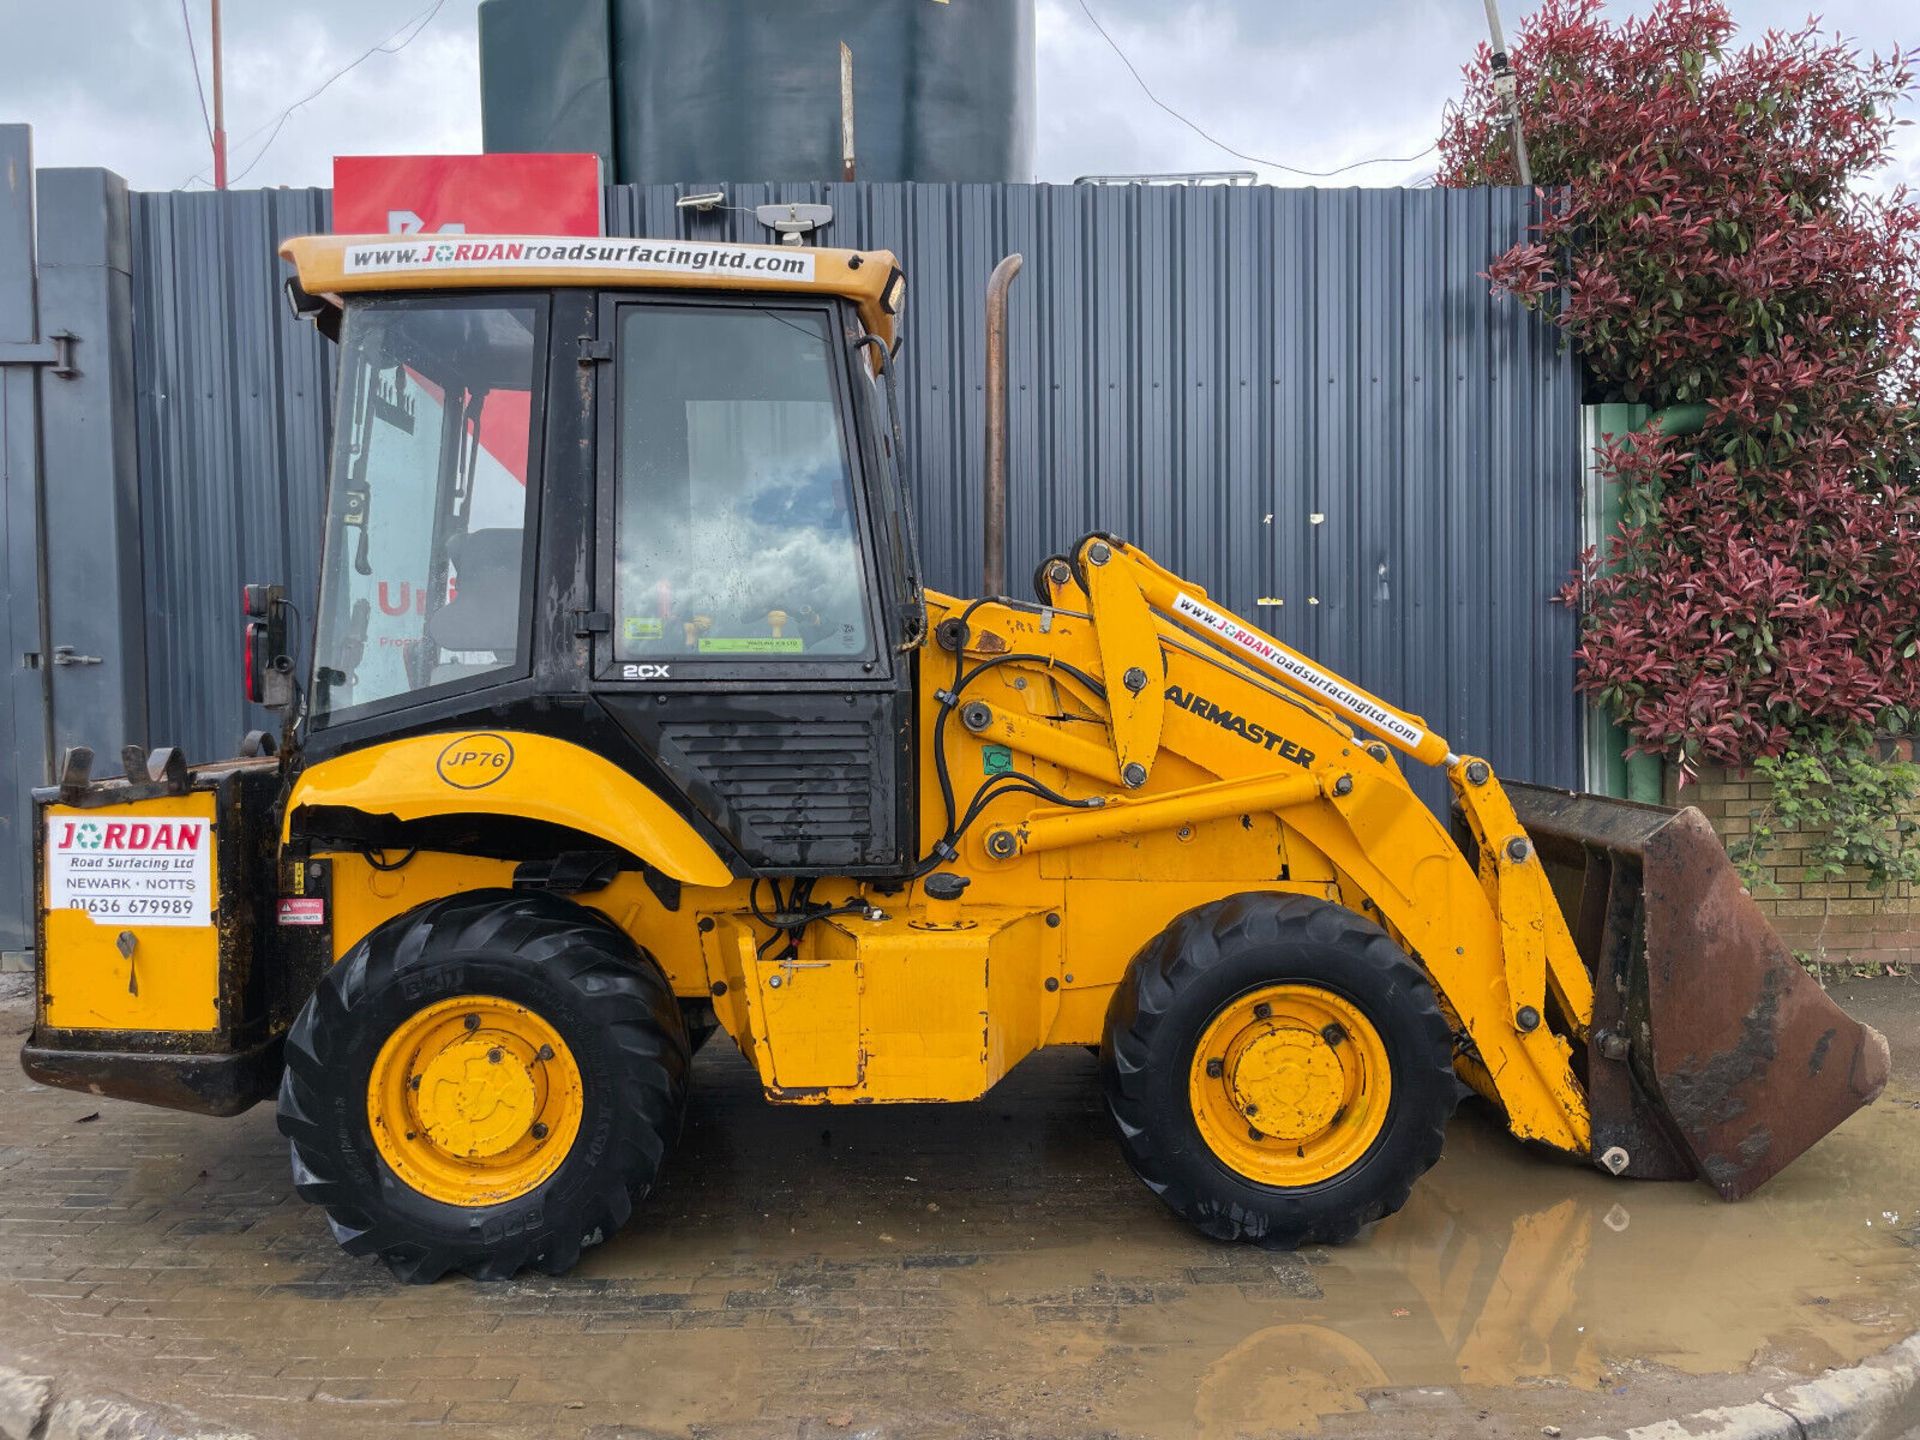 2002 JCB 2CX AIRMASTER: 4X4 LOADER WITH MANUAL GEARBOX POWER - Image 10 of 12